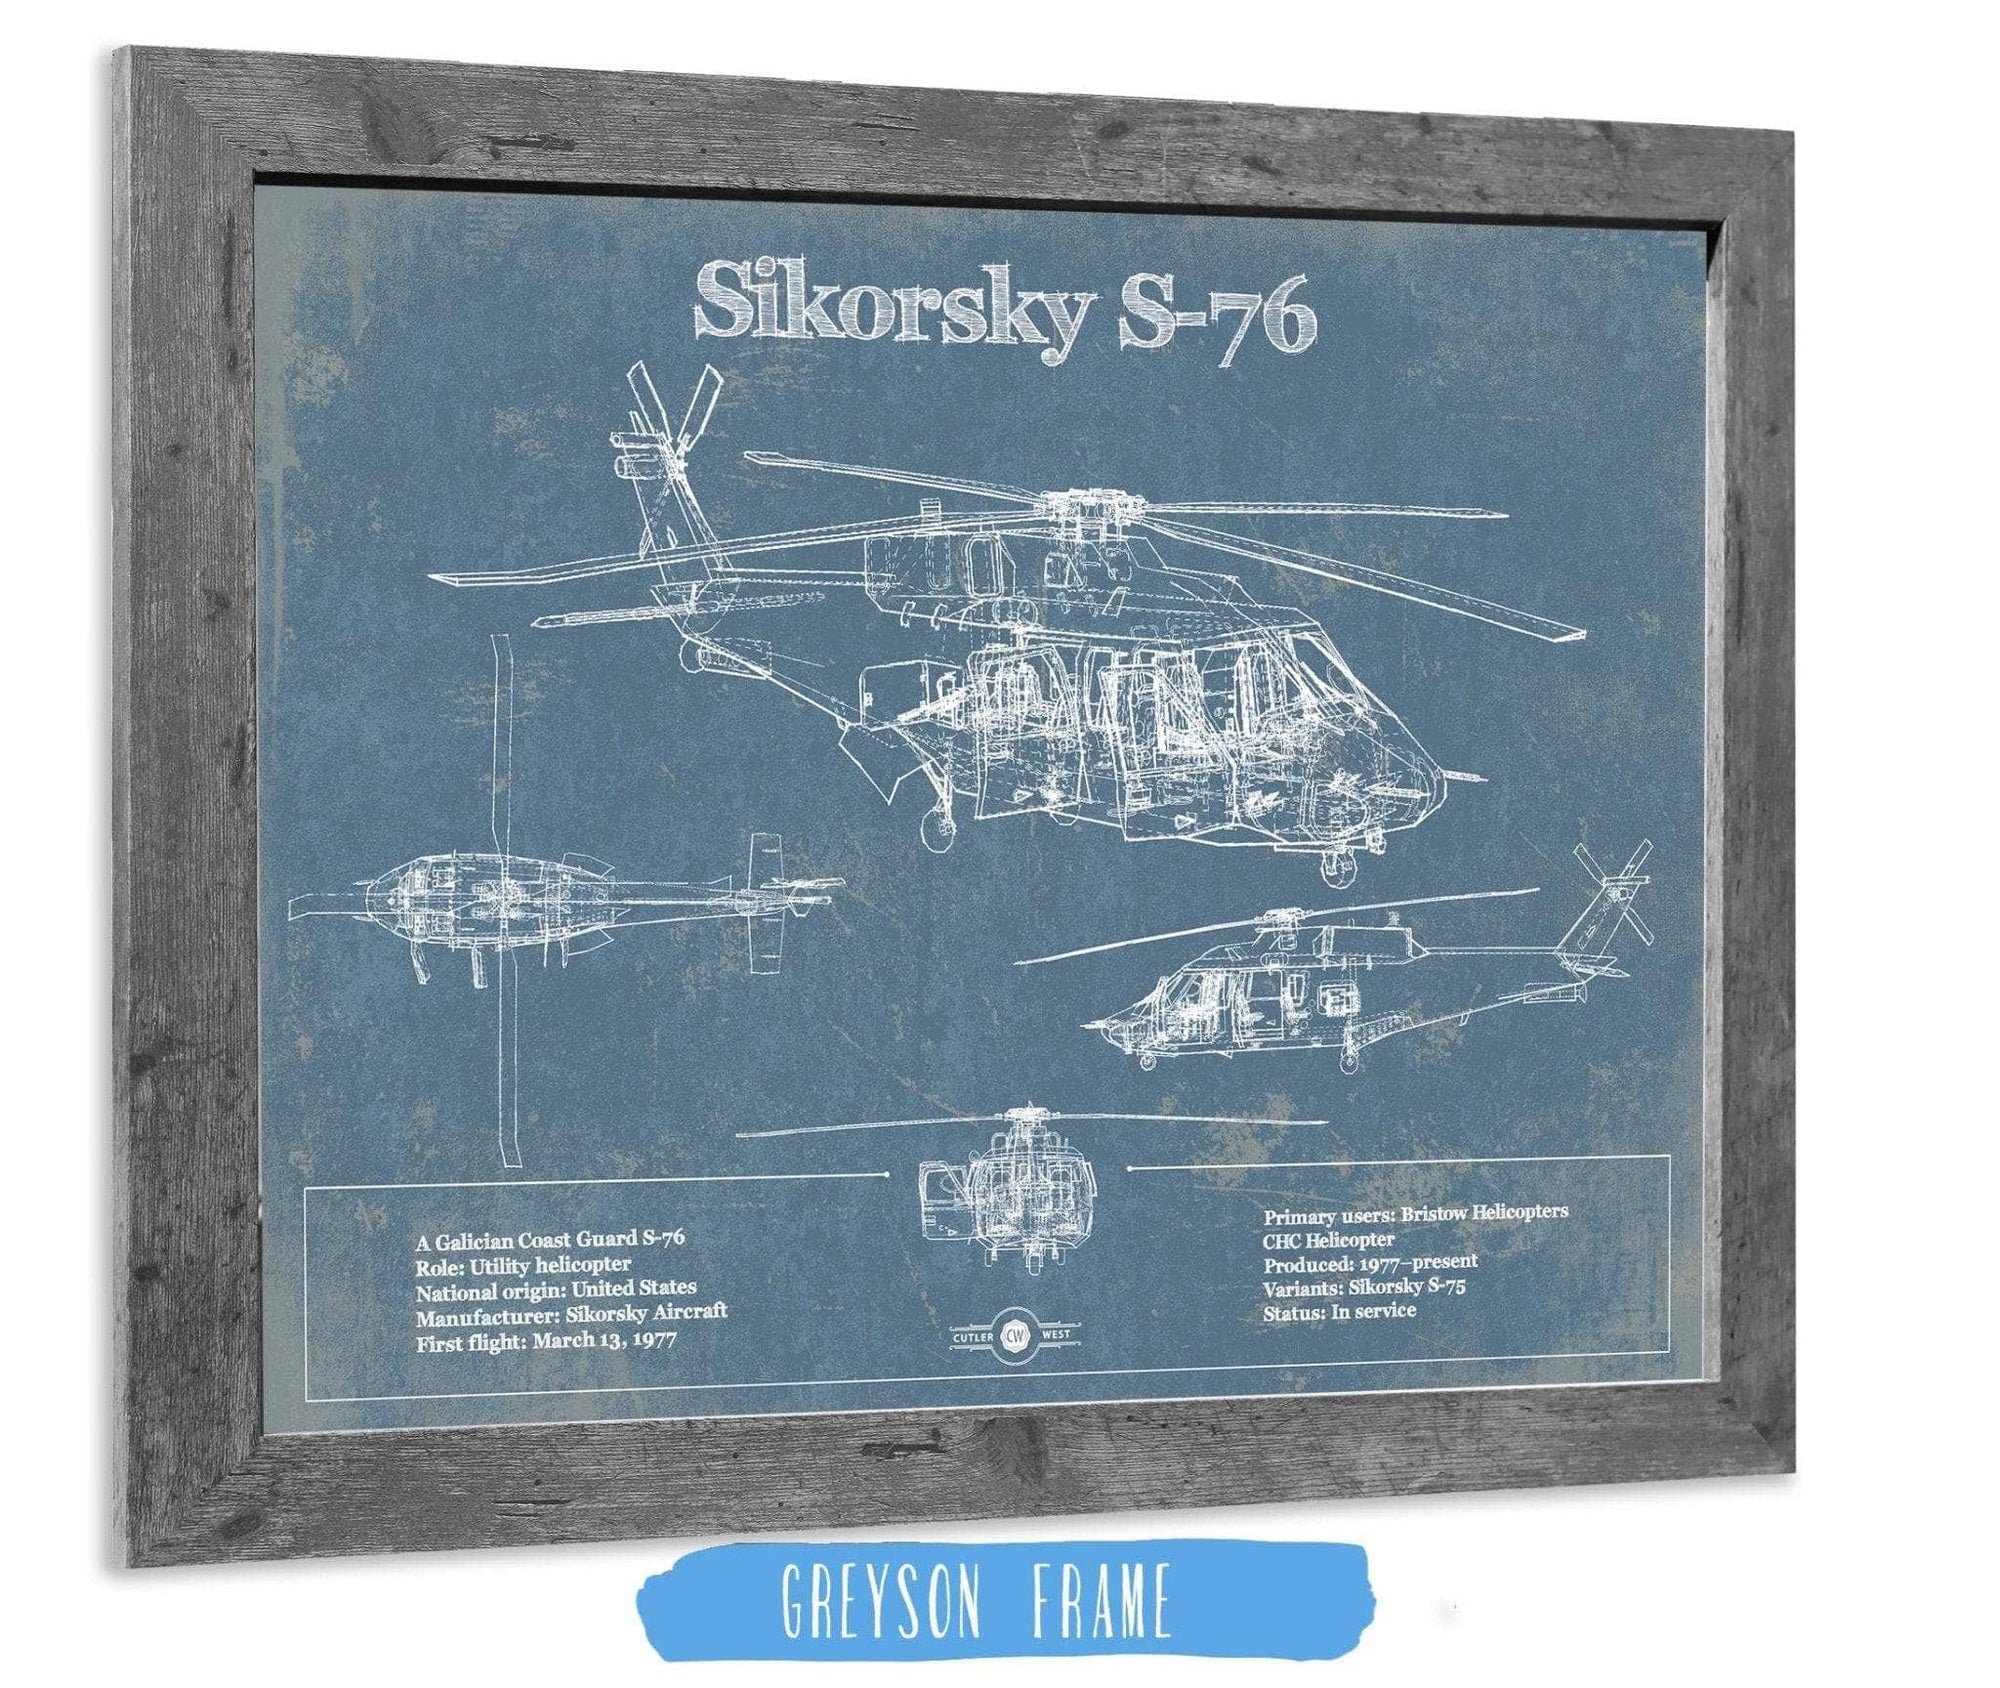 Cutler West Military Aircraft 14" x 11" / Greyson Frame Sikorsky S-76 Helicopter Vintage Aviation Blueprint Military Print 833110137_9704